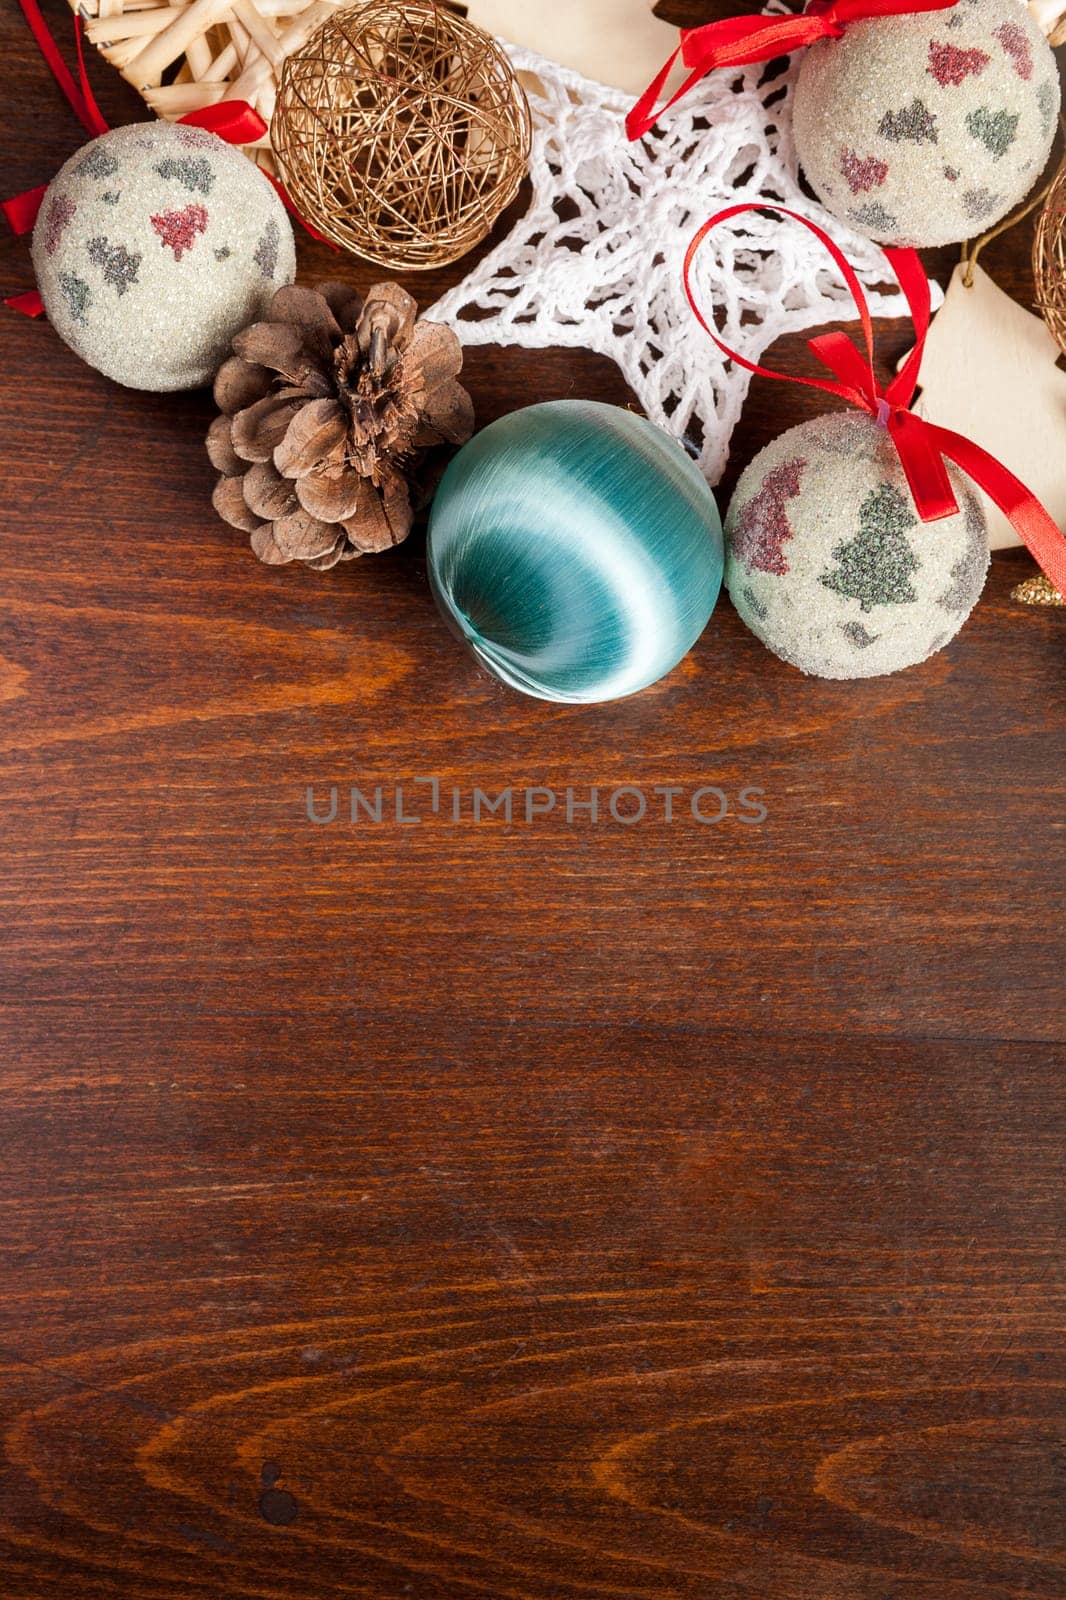 Christmas decorations on wooden background. Winter decorations table